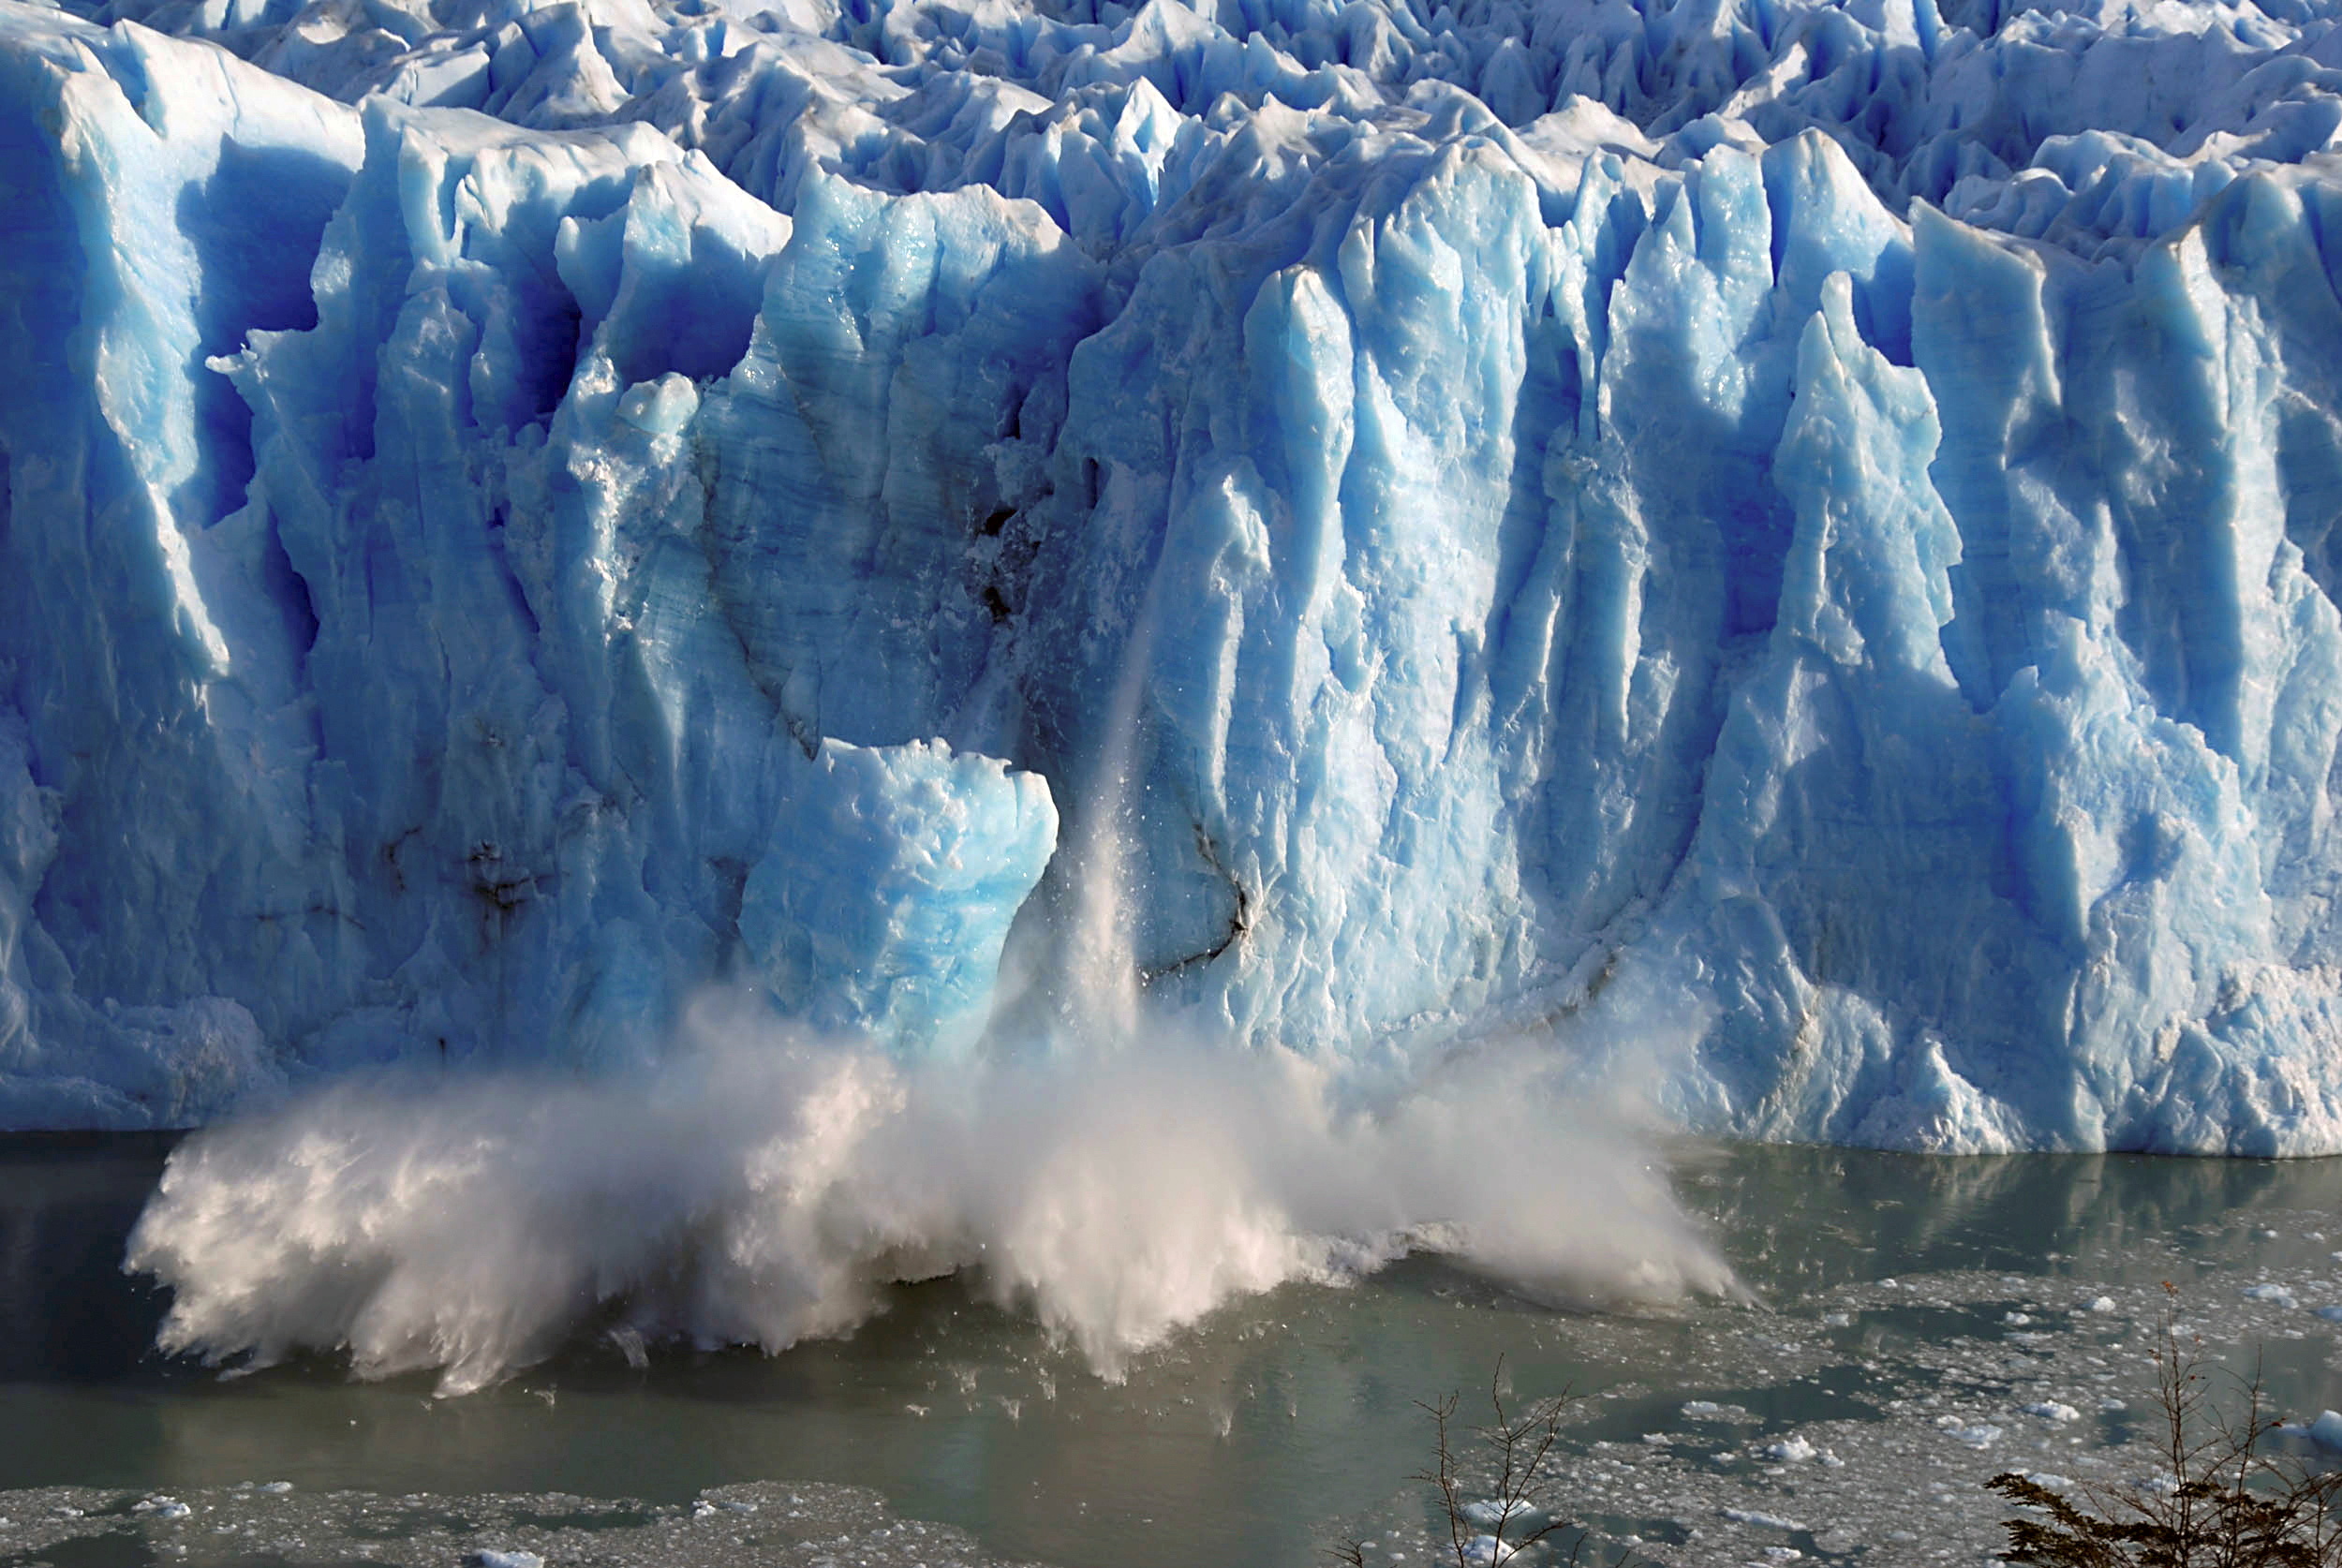 Splinters of ice peel off from one of the sides of the Perito Moreno glacier